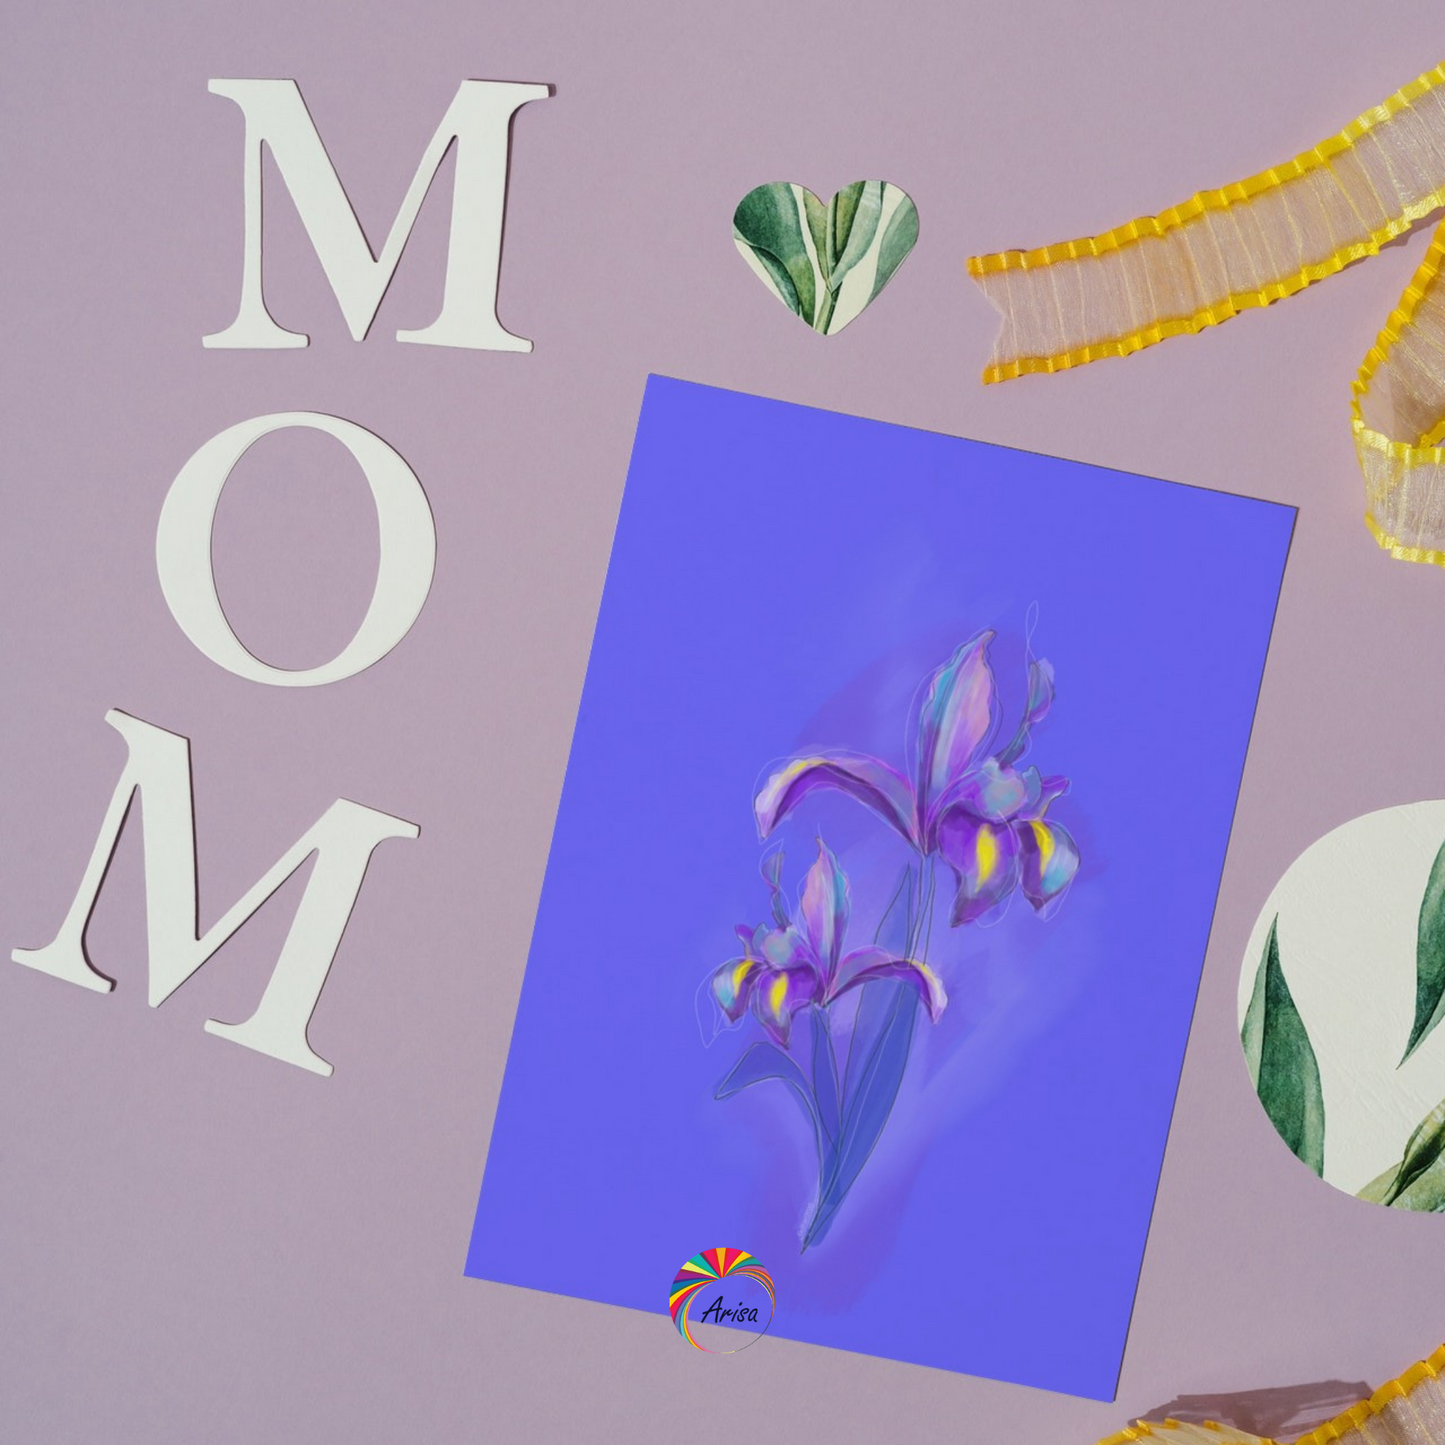 "Iris" Greeting Card by ArisaTeam ideal as a Mother's Day card.